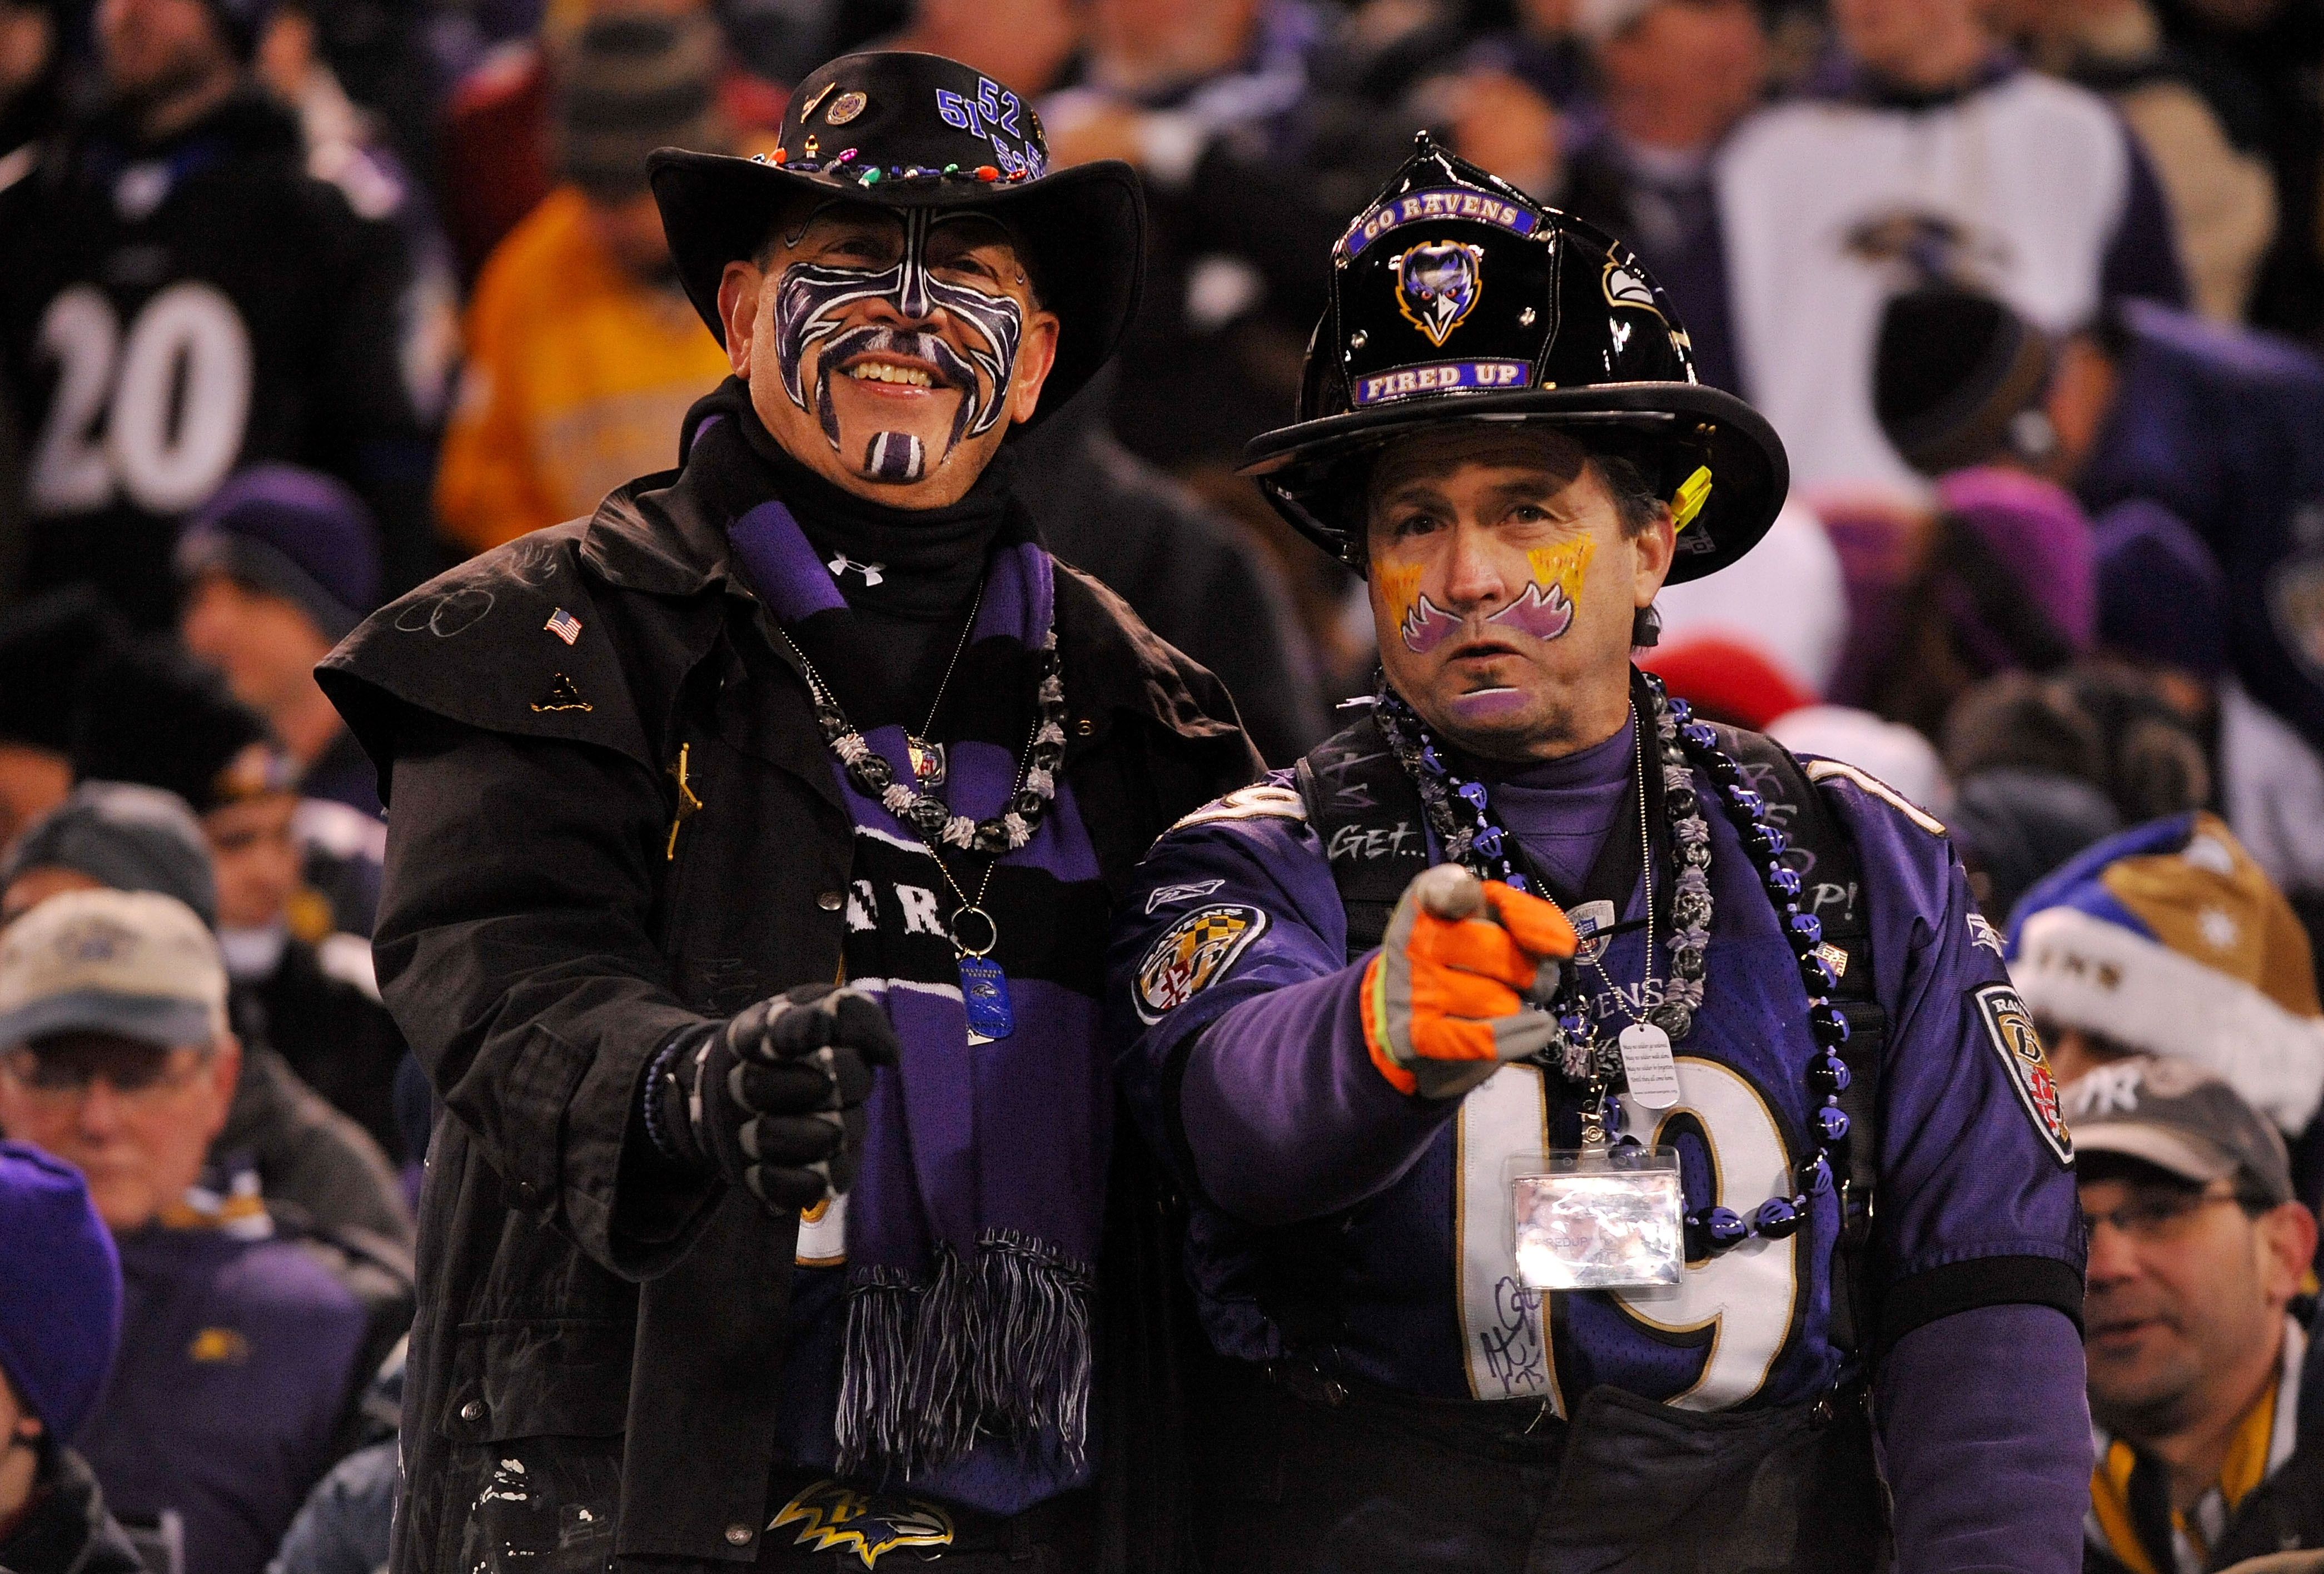 BALTIMORE, MD - DECEMBER 05:  Fans of the Baltimore Ravens smile for a photo during the second quarter of the game against the Pittsburgh Steelers at M&T Bank Stadium on December 5, 2010 in Baltimore, Maryland.  (Photo by Larry French/Getty Images)